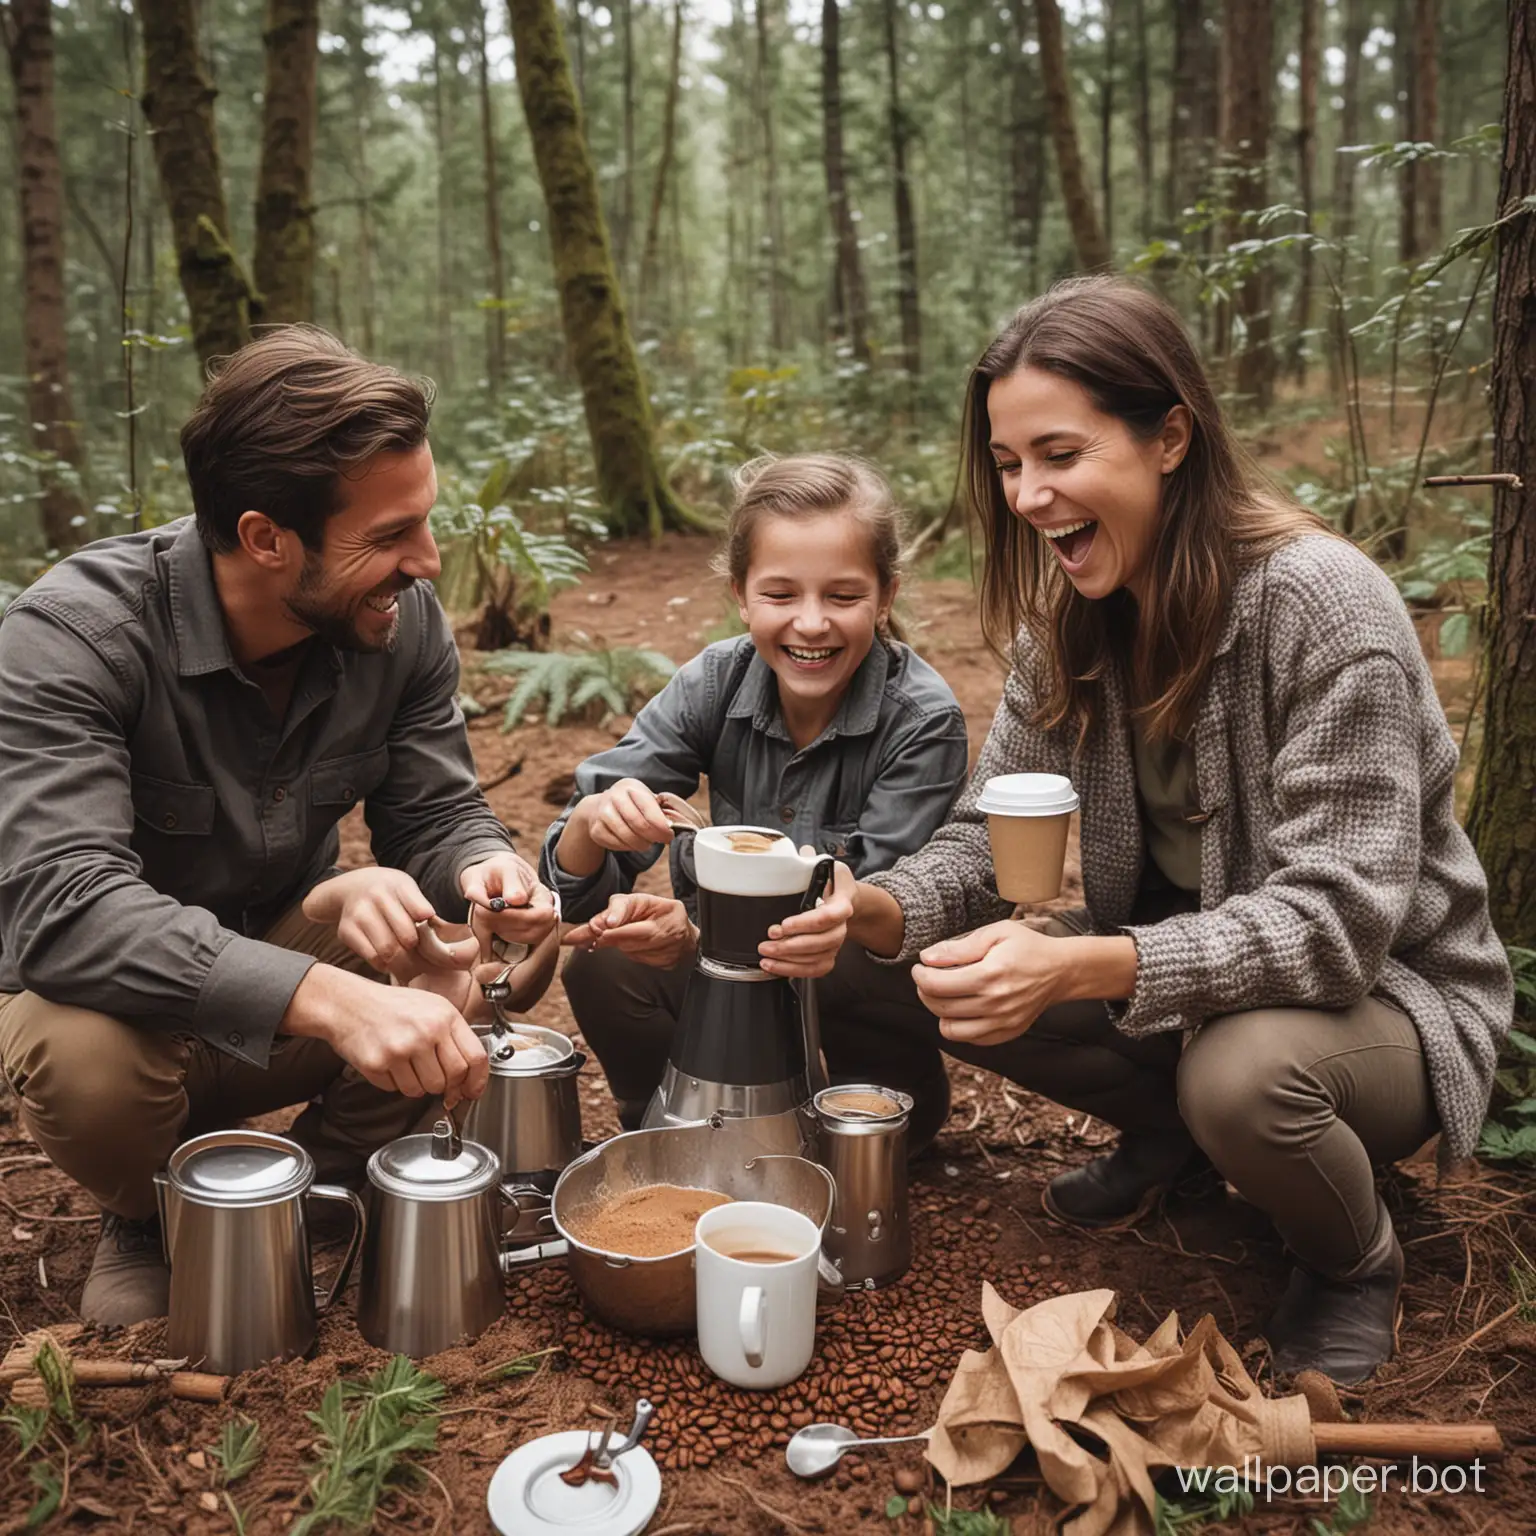 Family-Making-Coffee-Together-Outdoors-with-Laughter